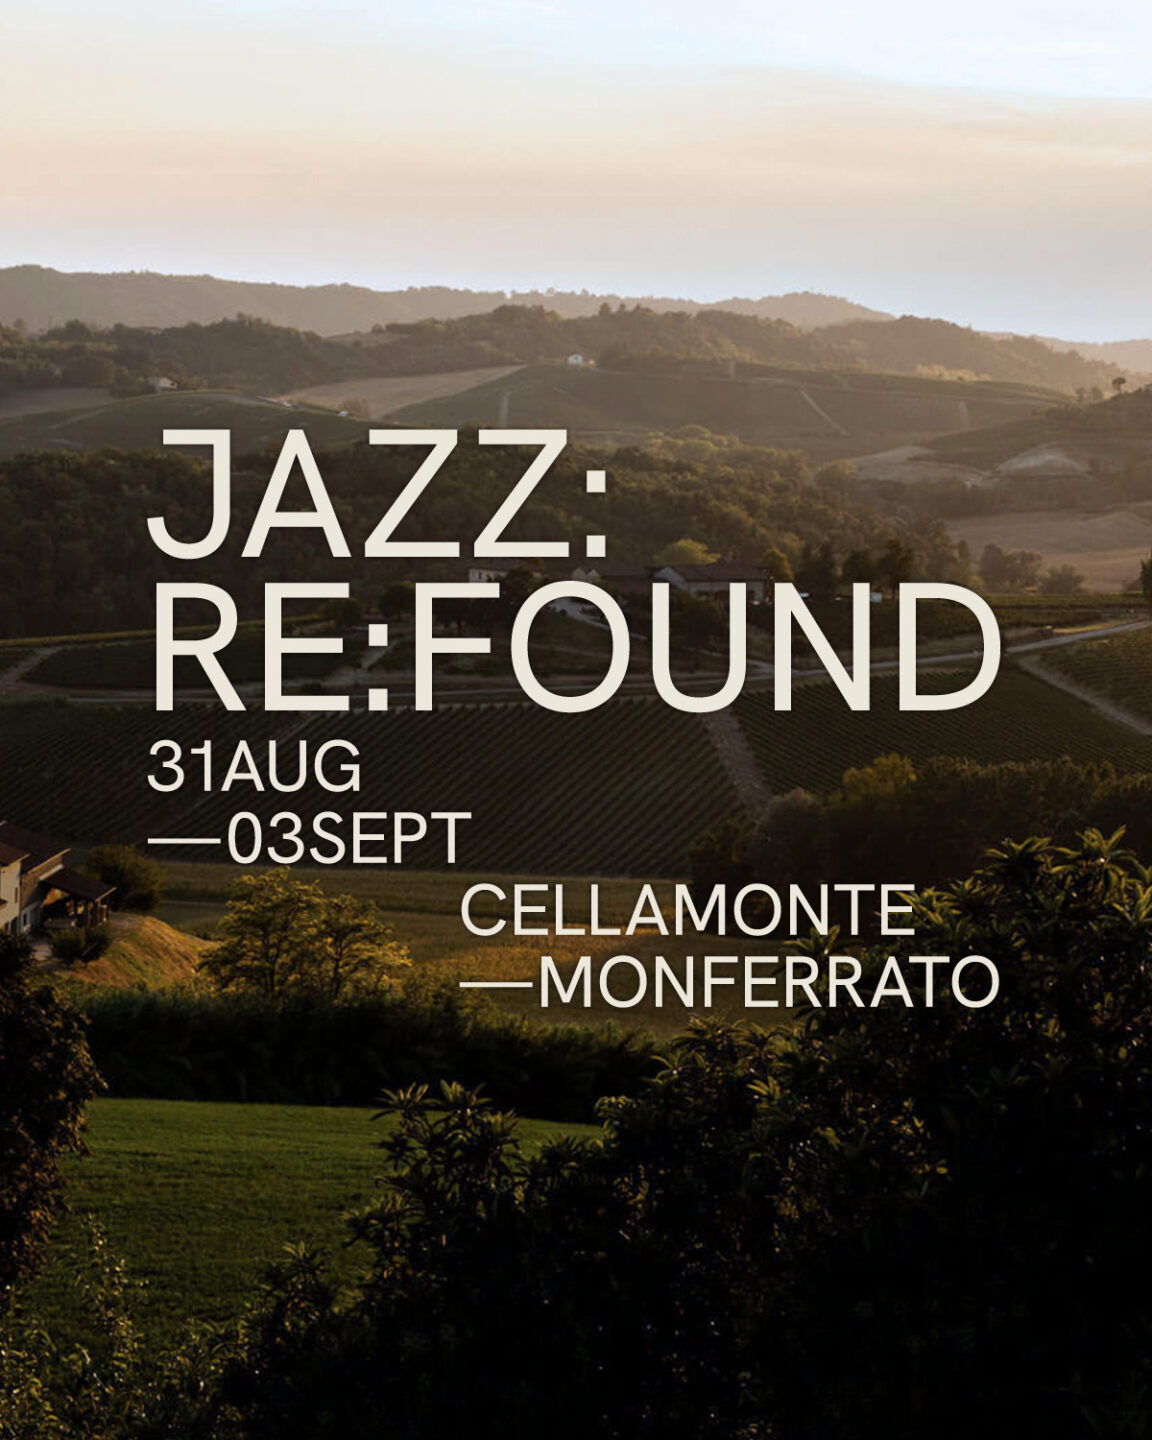 Peg & Co. - Jazz:Re:Found 2023 - Book your Glamping Tent today!